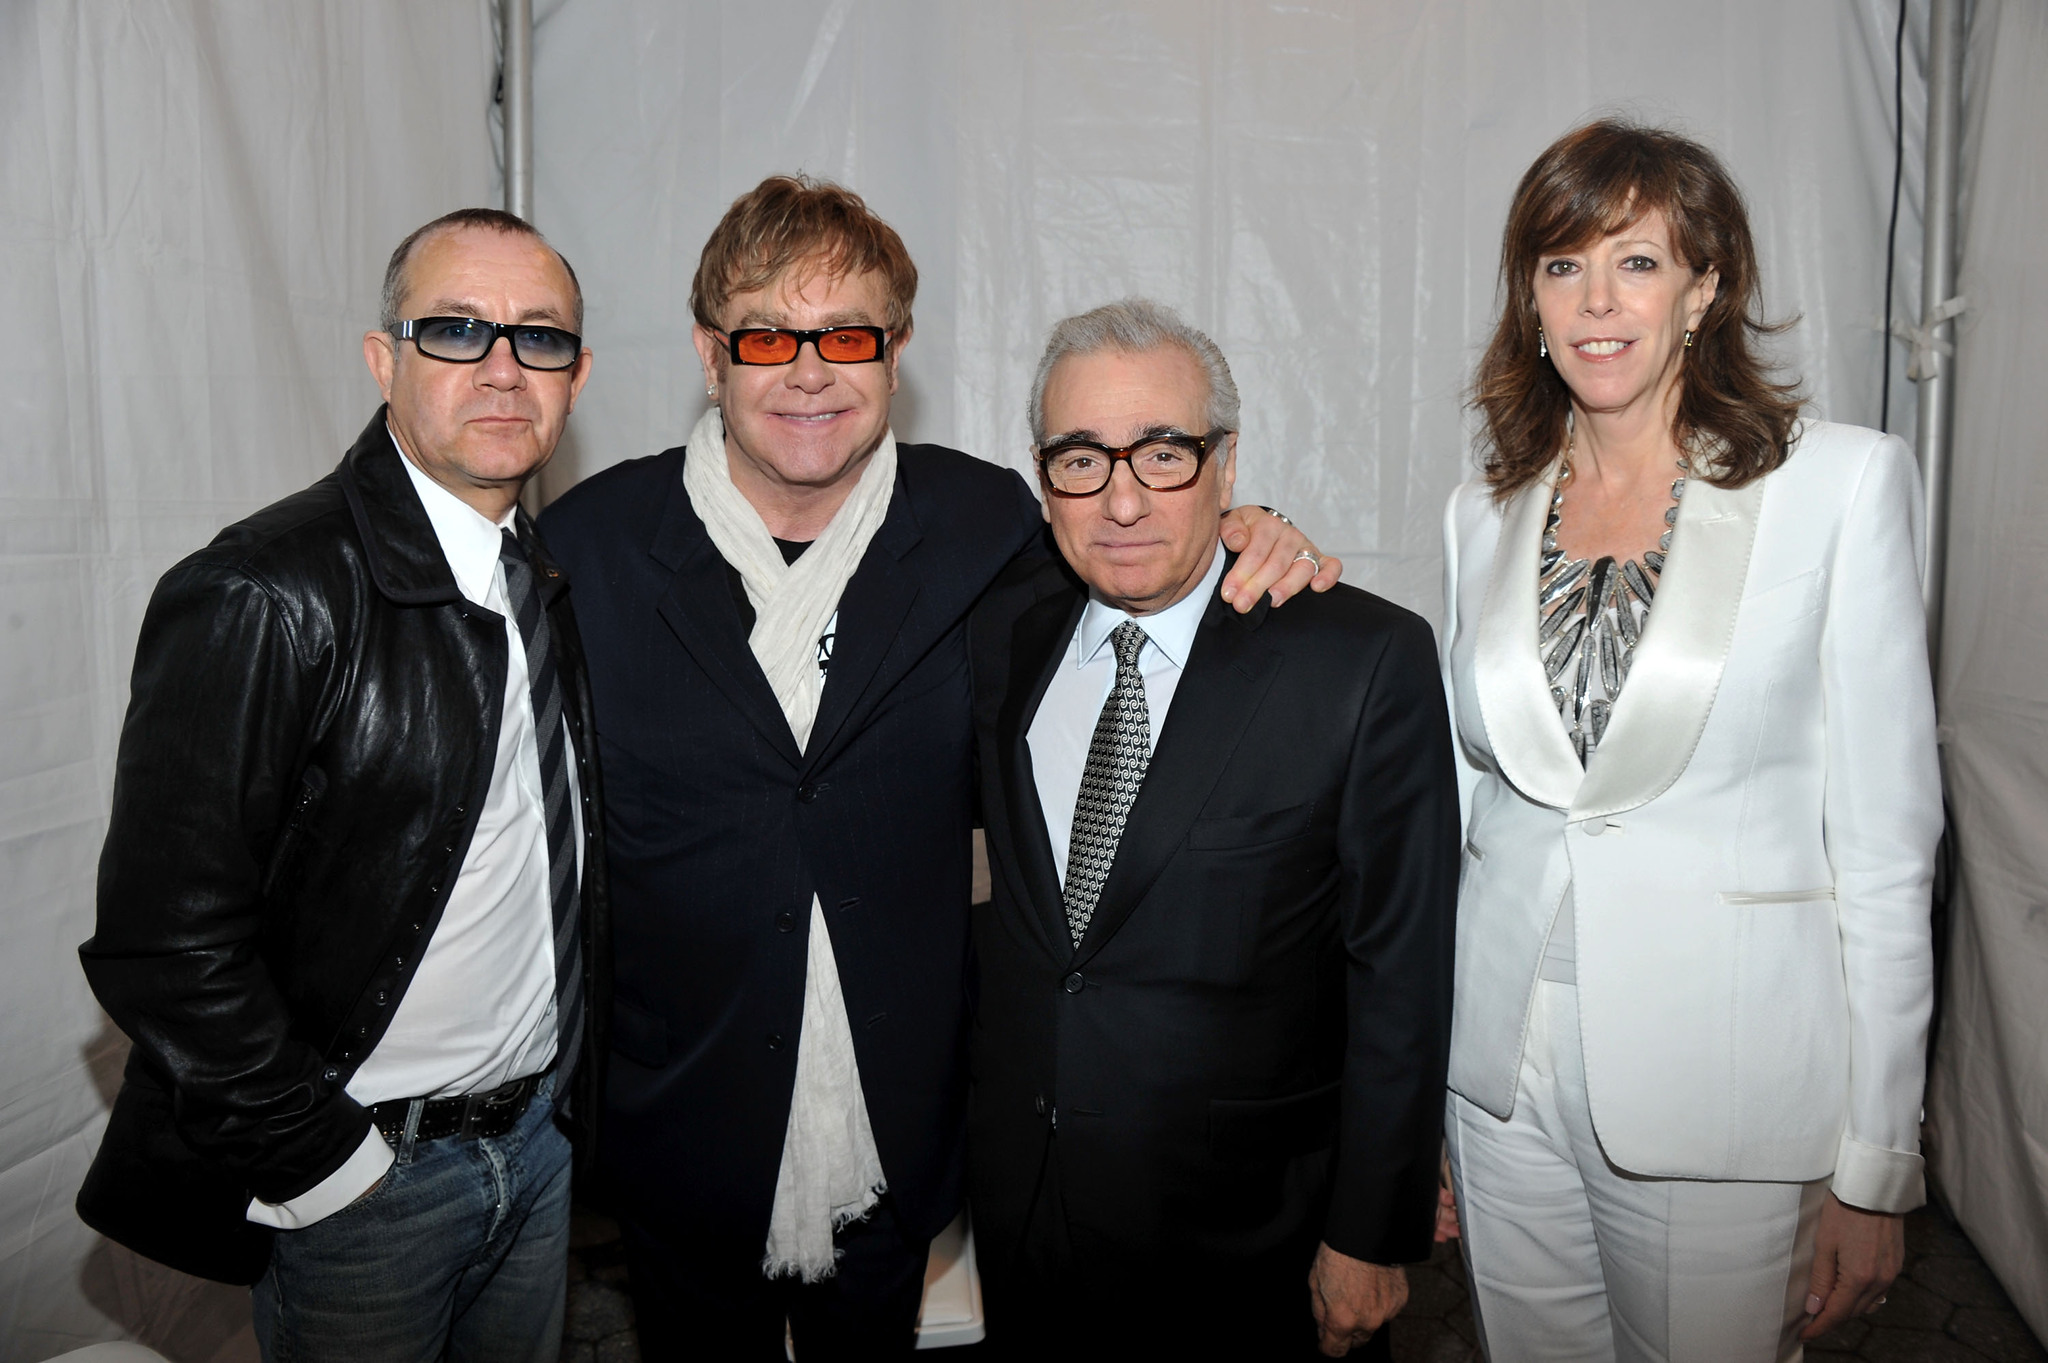 Martin Scorsese, Elton John, Bernie Taupin and Jane Rosenthal at event of The Union (2011)